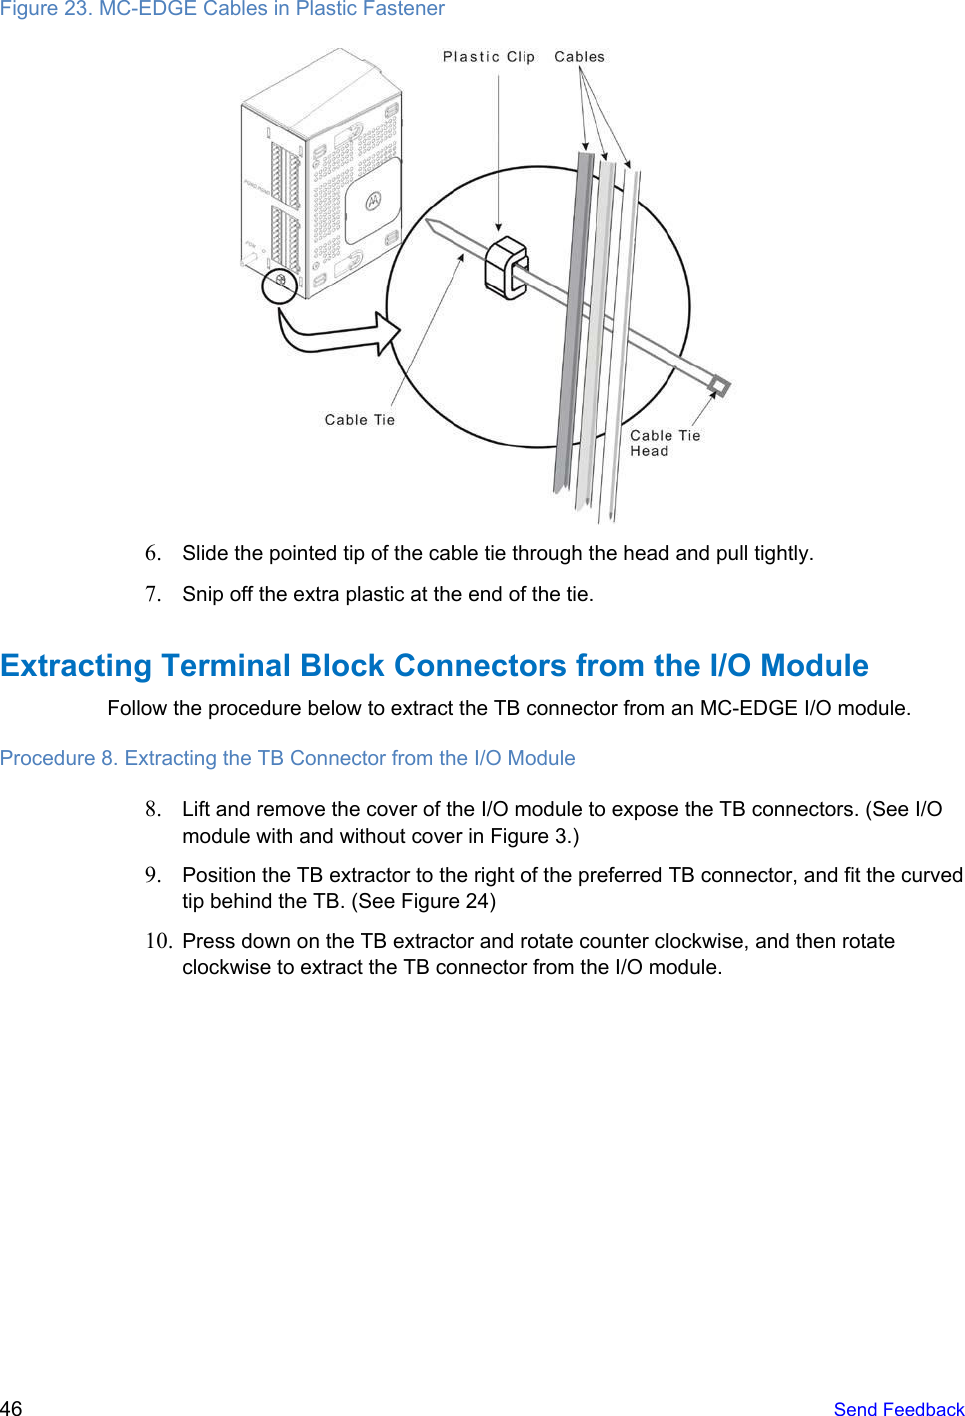   Figure 23. MC-EDGE Cables in Plastic Fastener  6. Slide the pointed tip of the cable tie through the head and pull tightly. 7. Snip off the extra plastic at the end of the tie. Extracting Terminal Block Connectors from the I/O Module Follow the procedure below to extract the TB connector from an MC-EDGE I/O module. Procedure 8. Extracting the TB Connector from the I/O Module 8. Lift and remove the cover of the I/O module to expose the TB connectors. (See I/O module with and without cover in Figure 3.) 9. Position the TB extractor to the right of the preferred TB connector, and fit the curved tip behind the TB. (See Figure 24) 10. Press down on the TB extractor and rotate counter clockwise, and then rotate clockwise to extract the TB connector from the I/O module. 46   Send Feedback  